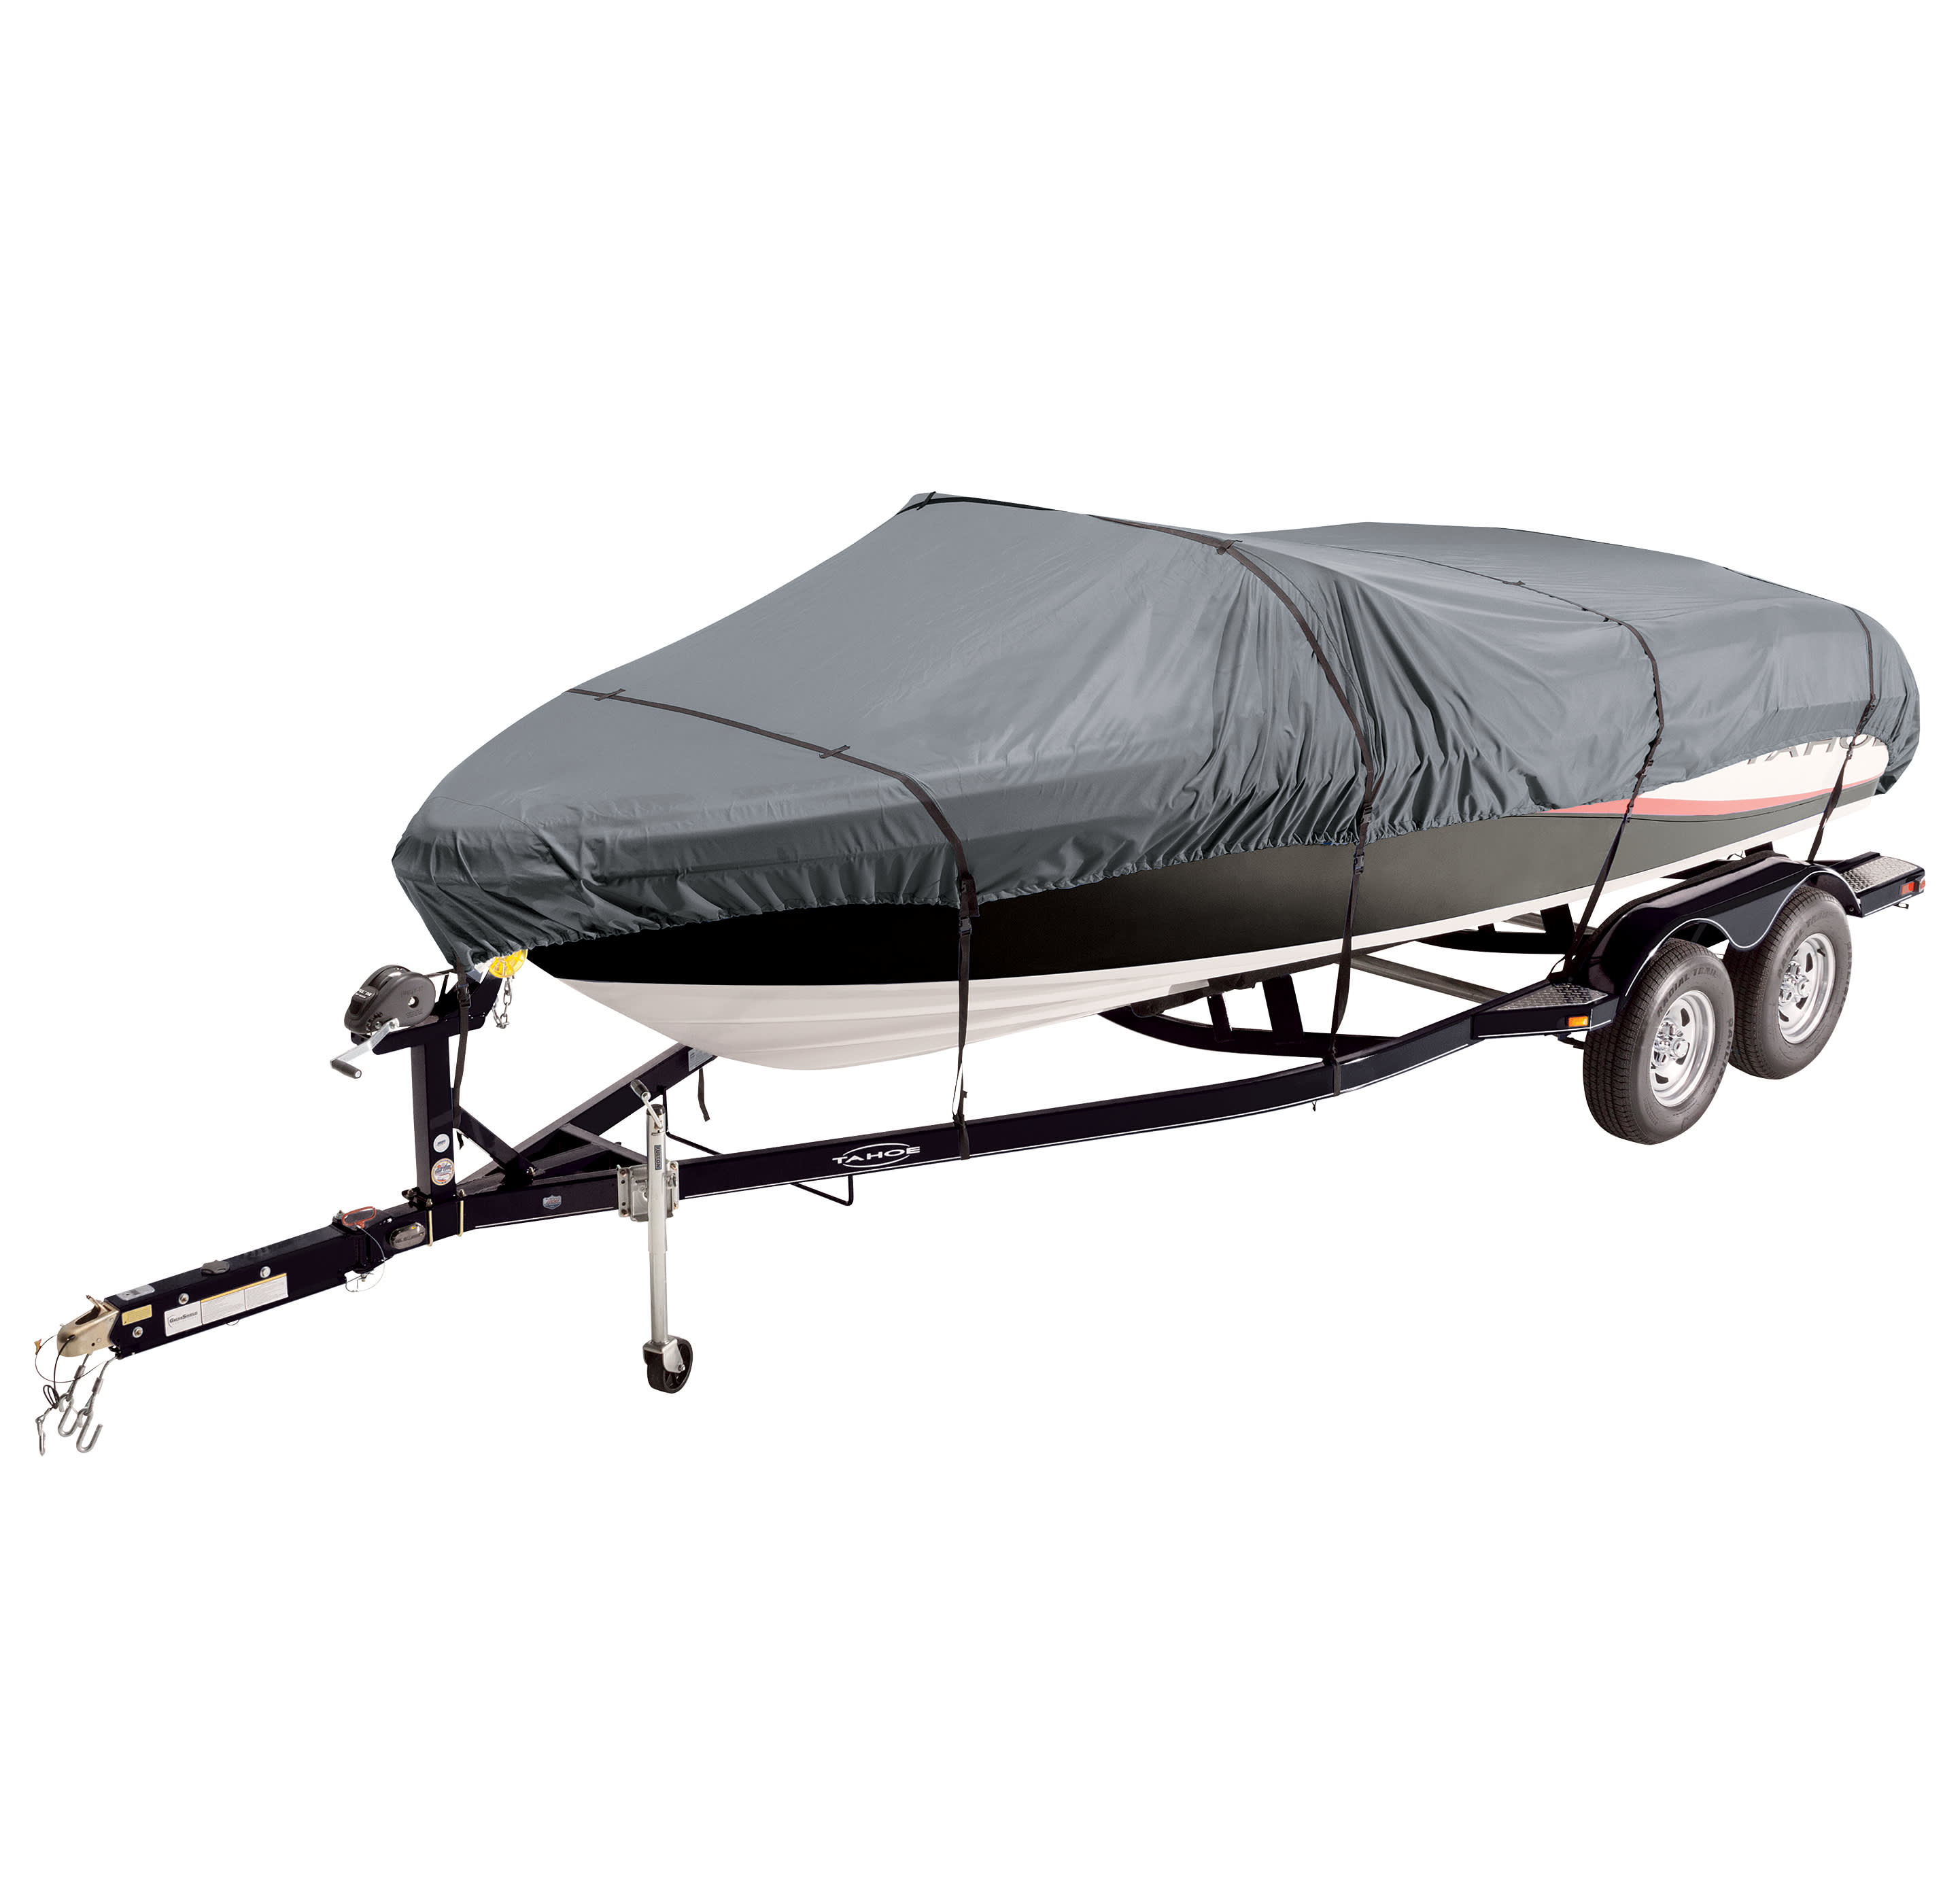 Bass Pro Shops® Travel Tite® Boat Cover